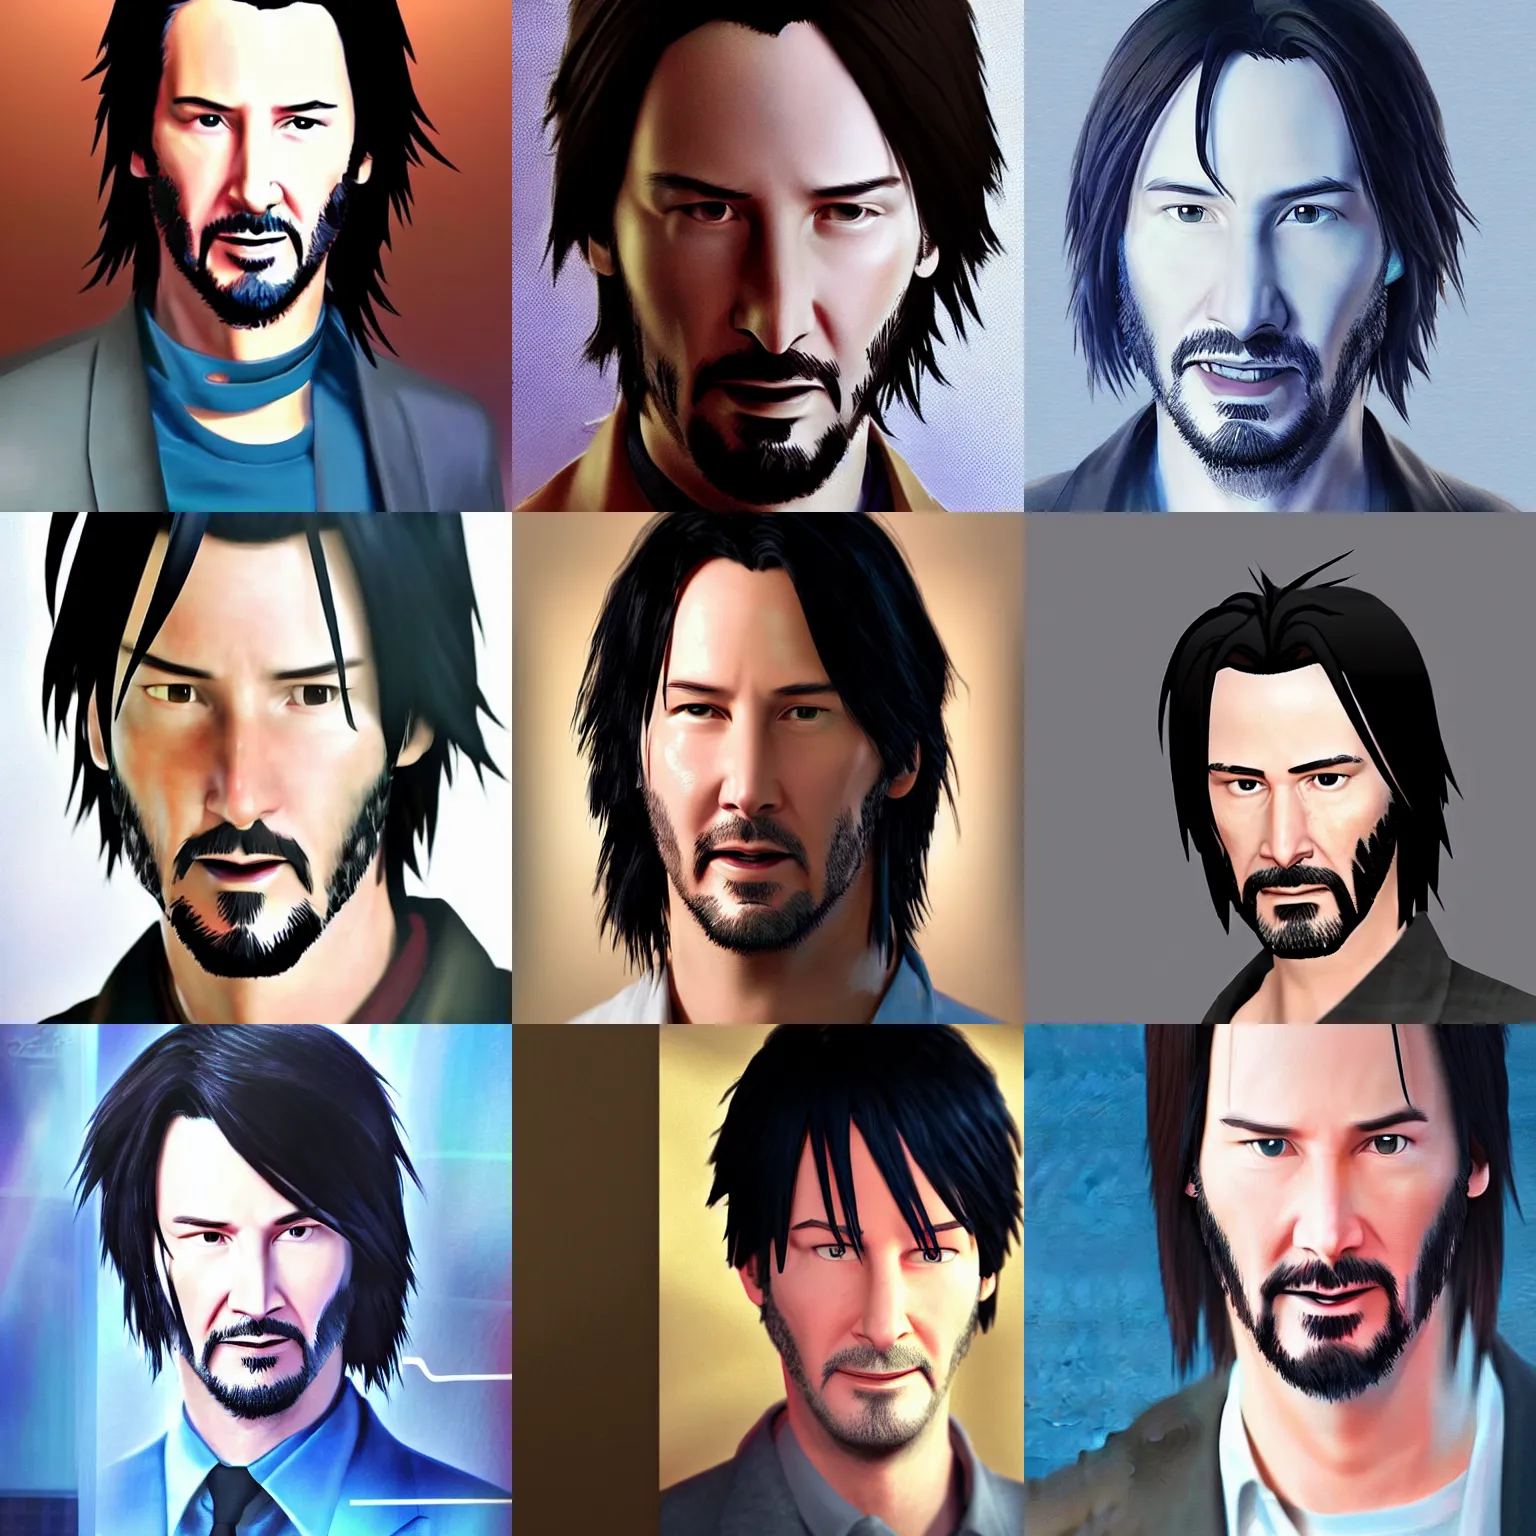 Prompt: 3d Anime portrait of Keanu Reeves by pixar, epic lighting, ultra realistic